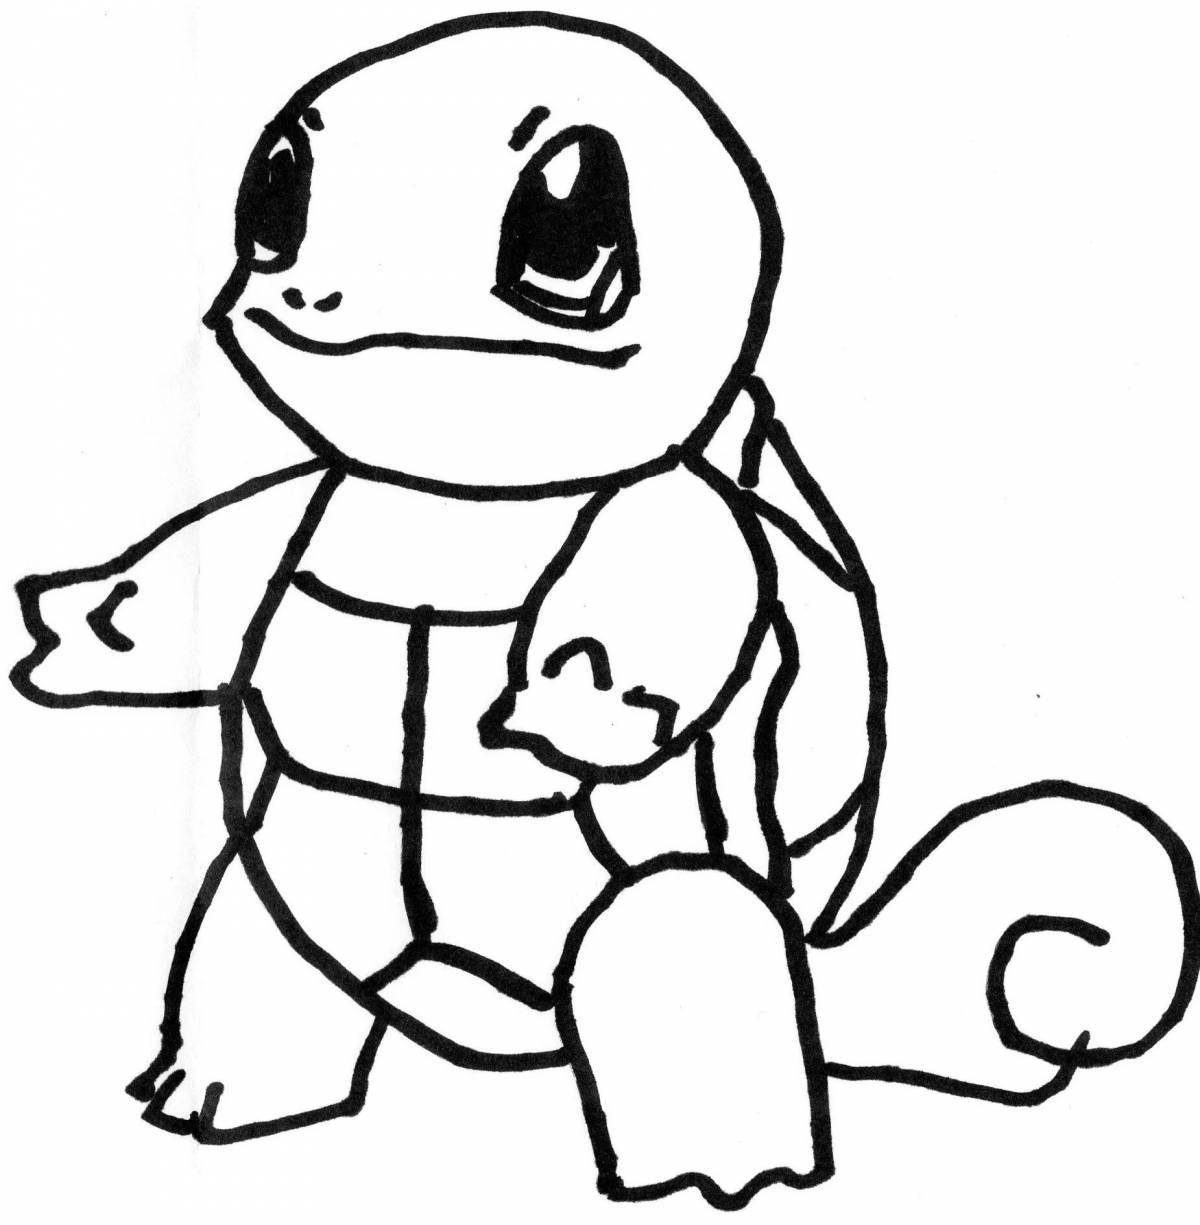 Dazzling squirtle pokemon coloring page